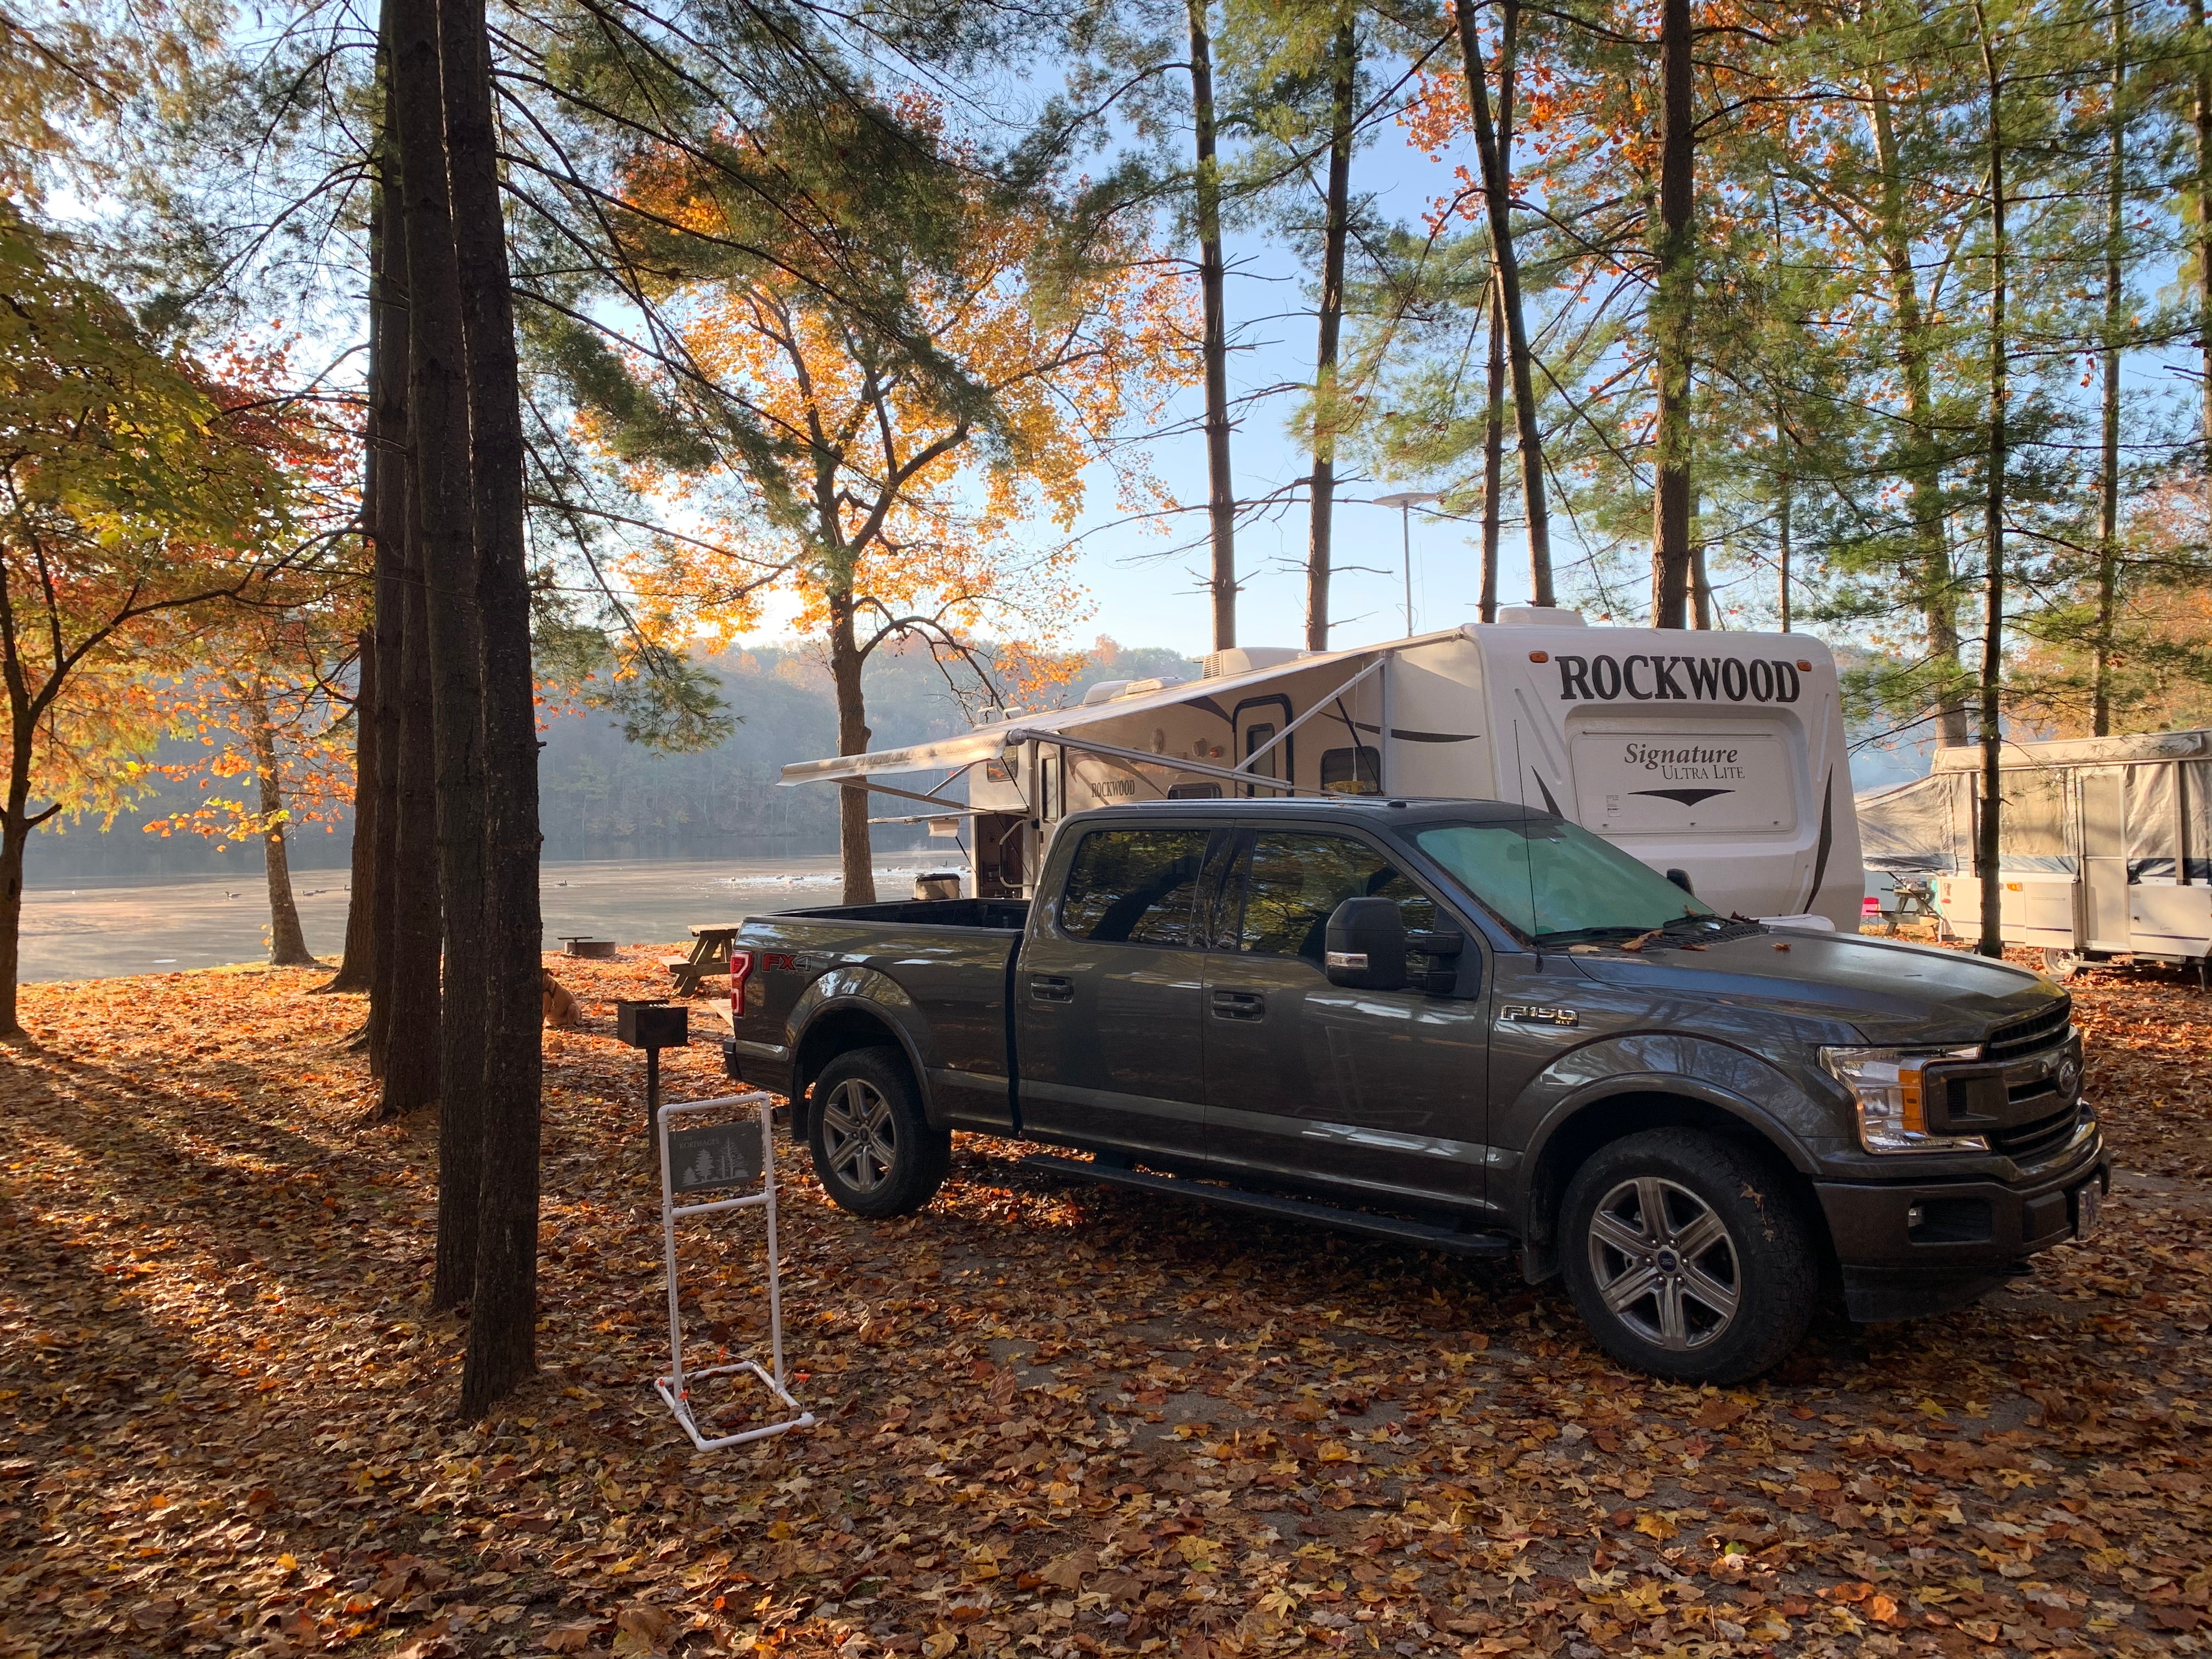 A beautiful fall day in November 2019 on campsite #28!